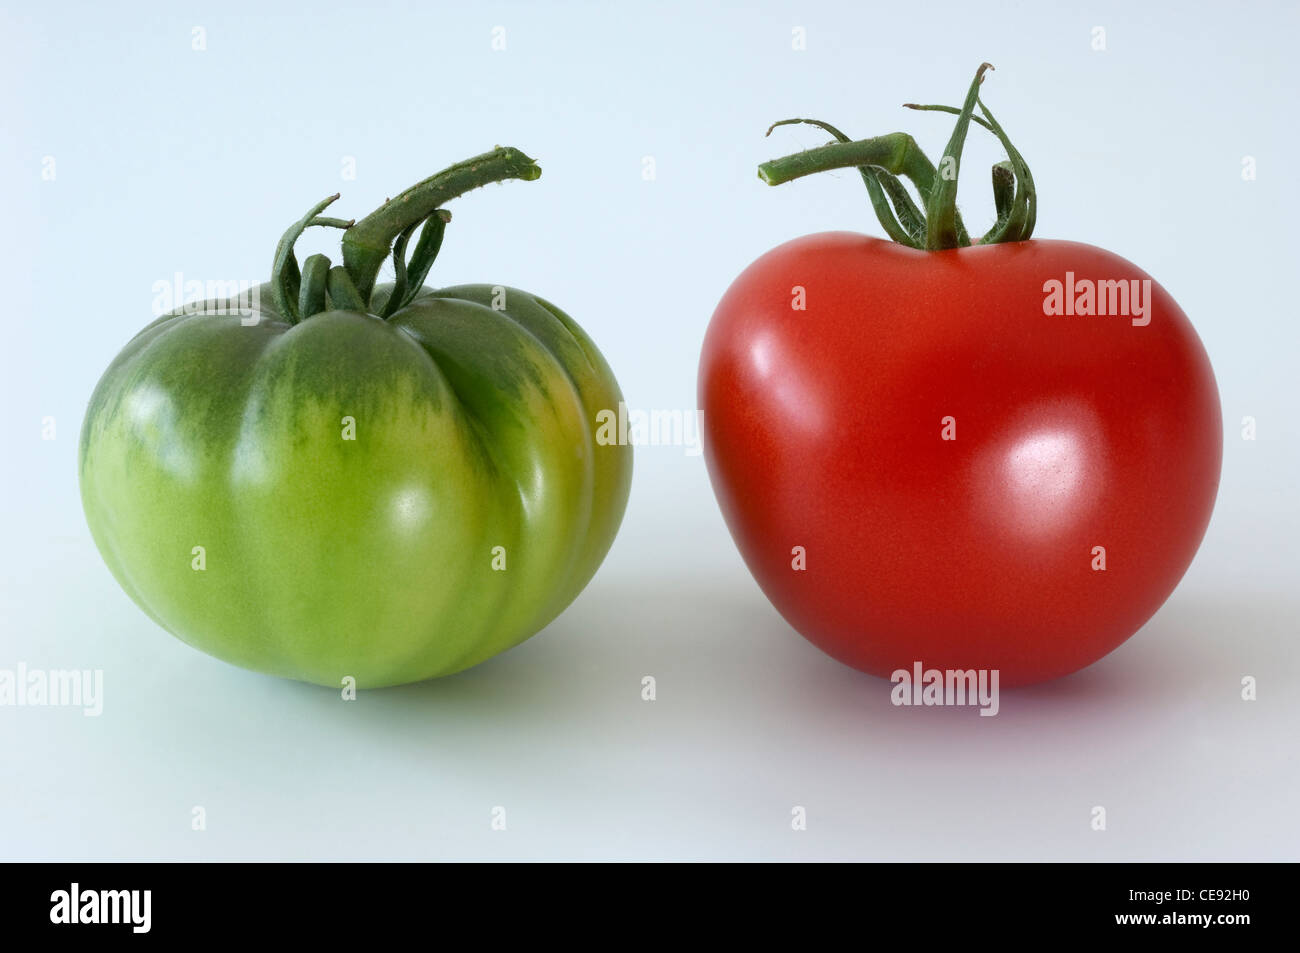 Tomato (Lycopersicon esculentum). Red and green fruit. Studio picture against a white background. Stock Photo